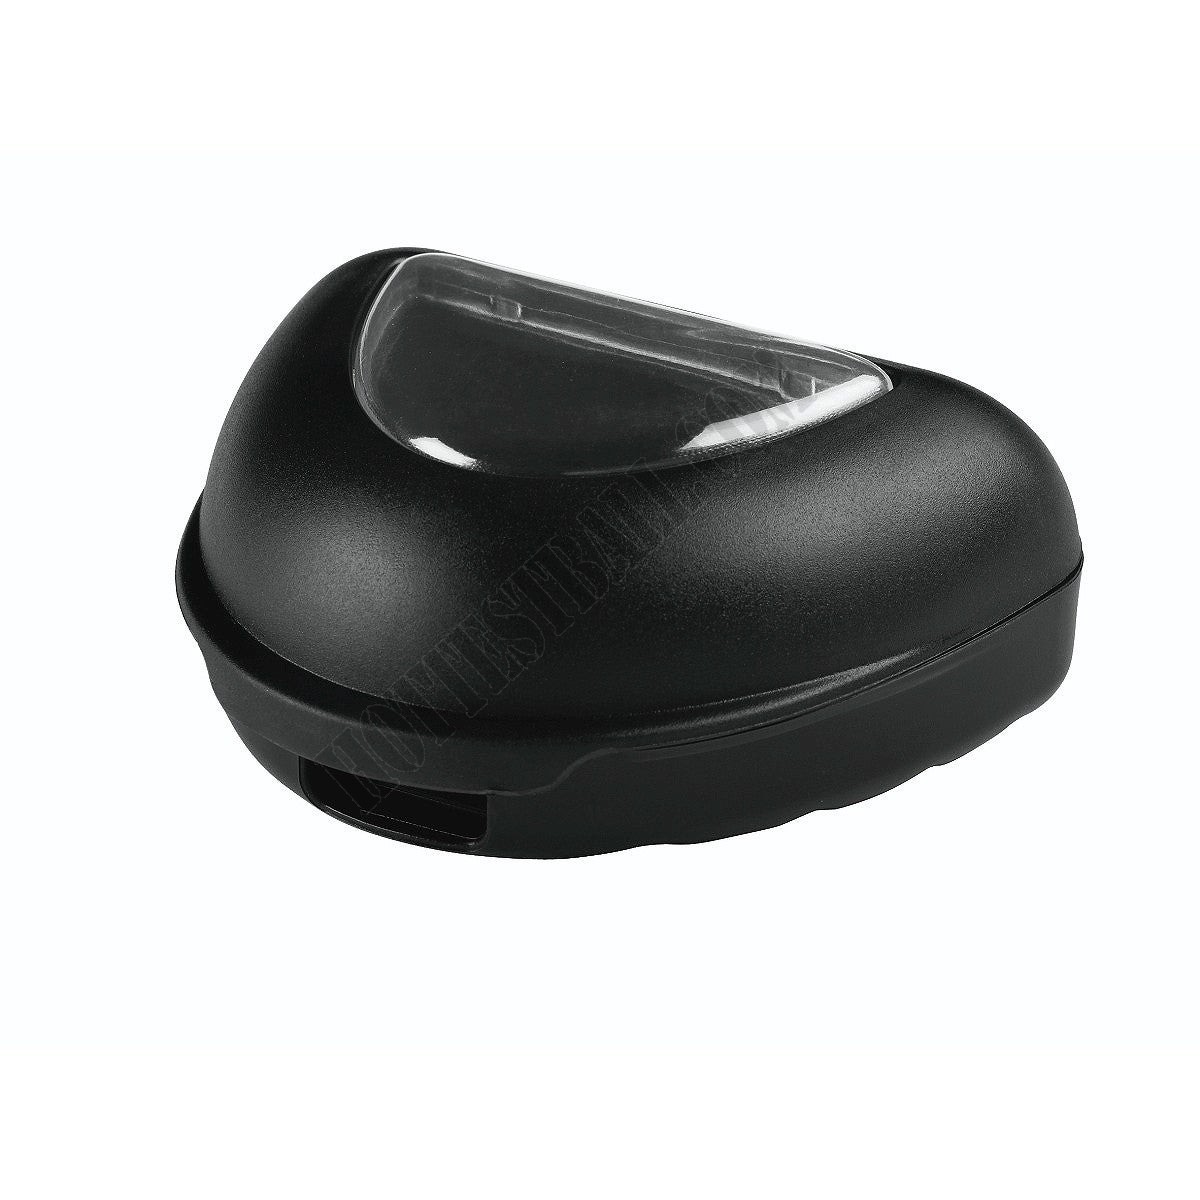 Mouth Guard Case - Wilson Discount Store - -0